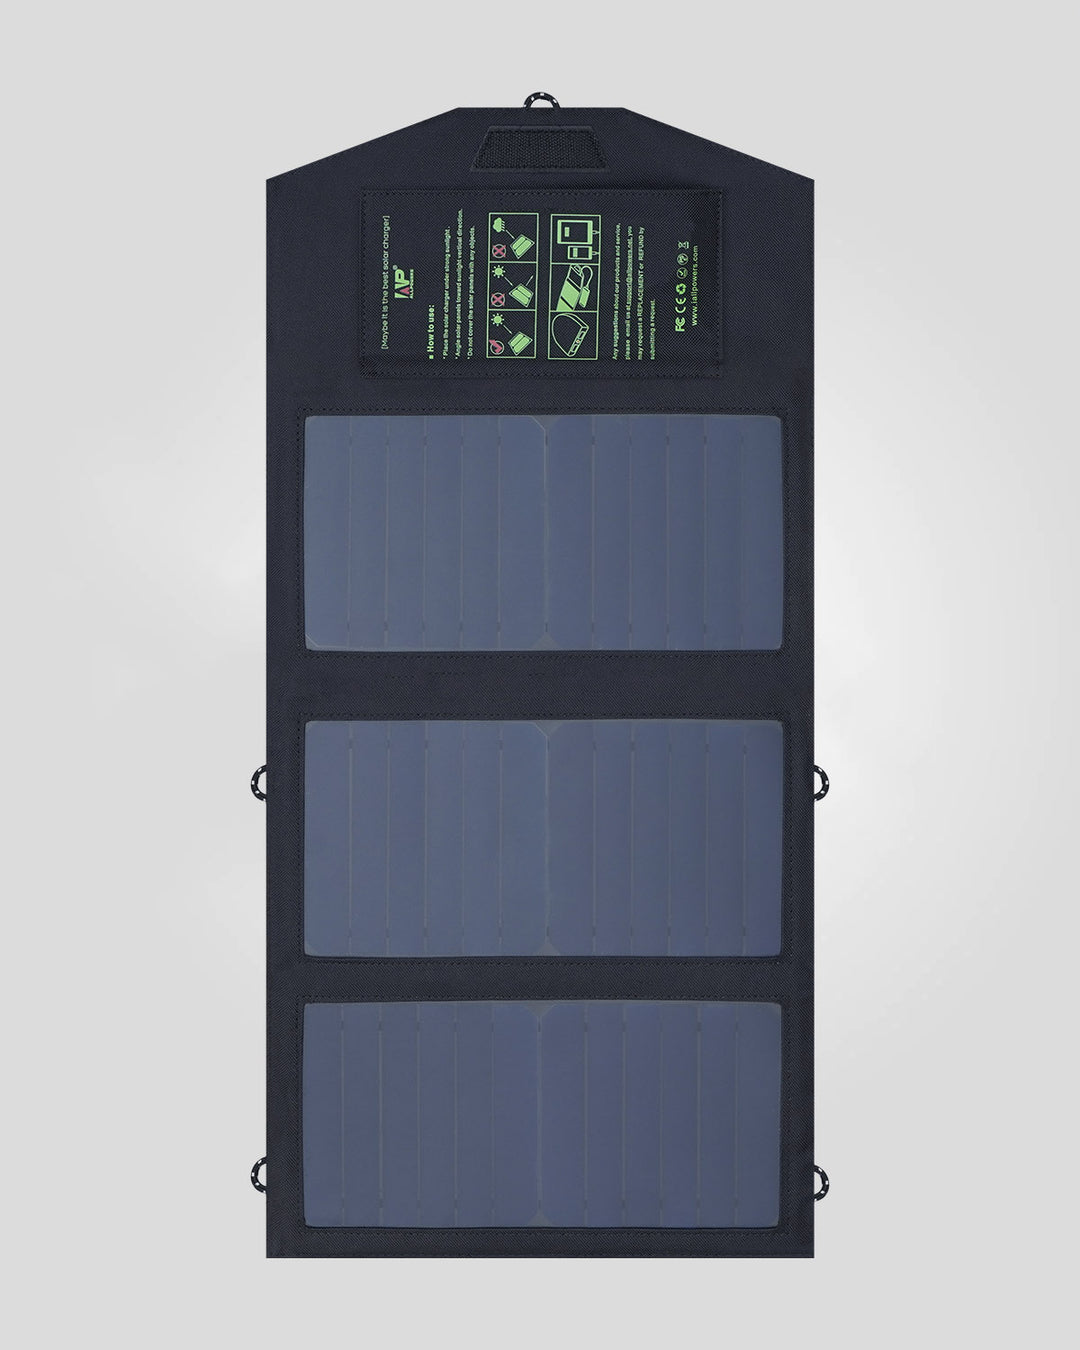 ALLPOWERS 5V 21W Solarpanel (Camouflage)